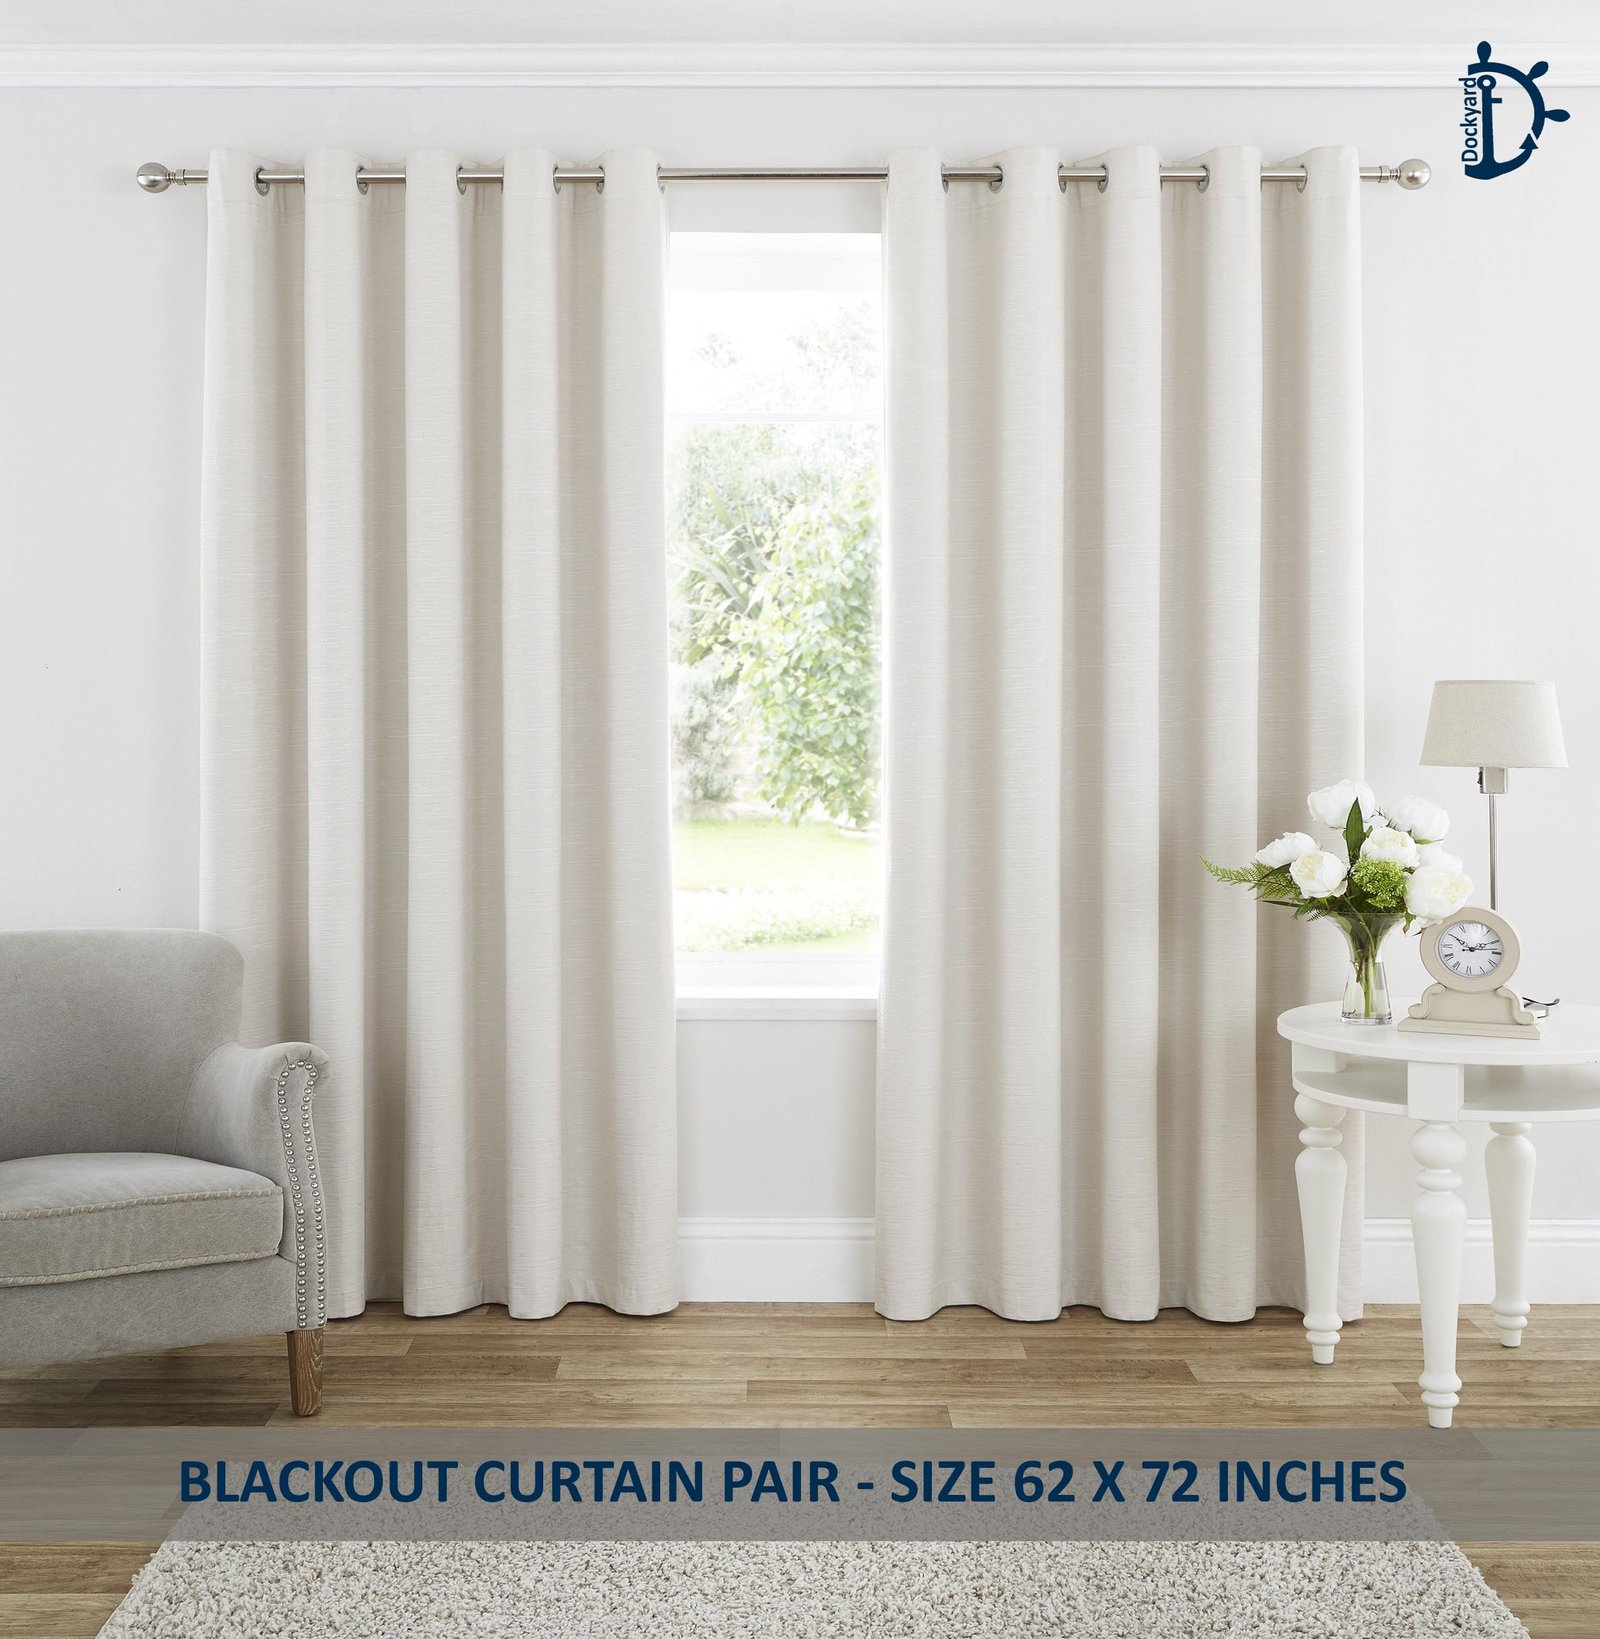 Blackout curtain liner PANEL – Thermal insulating light blocking curtain -  1 PIECE